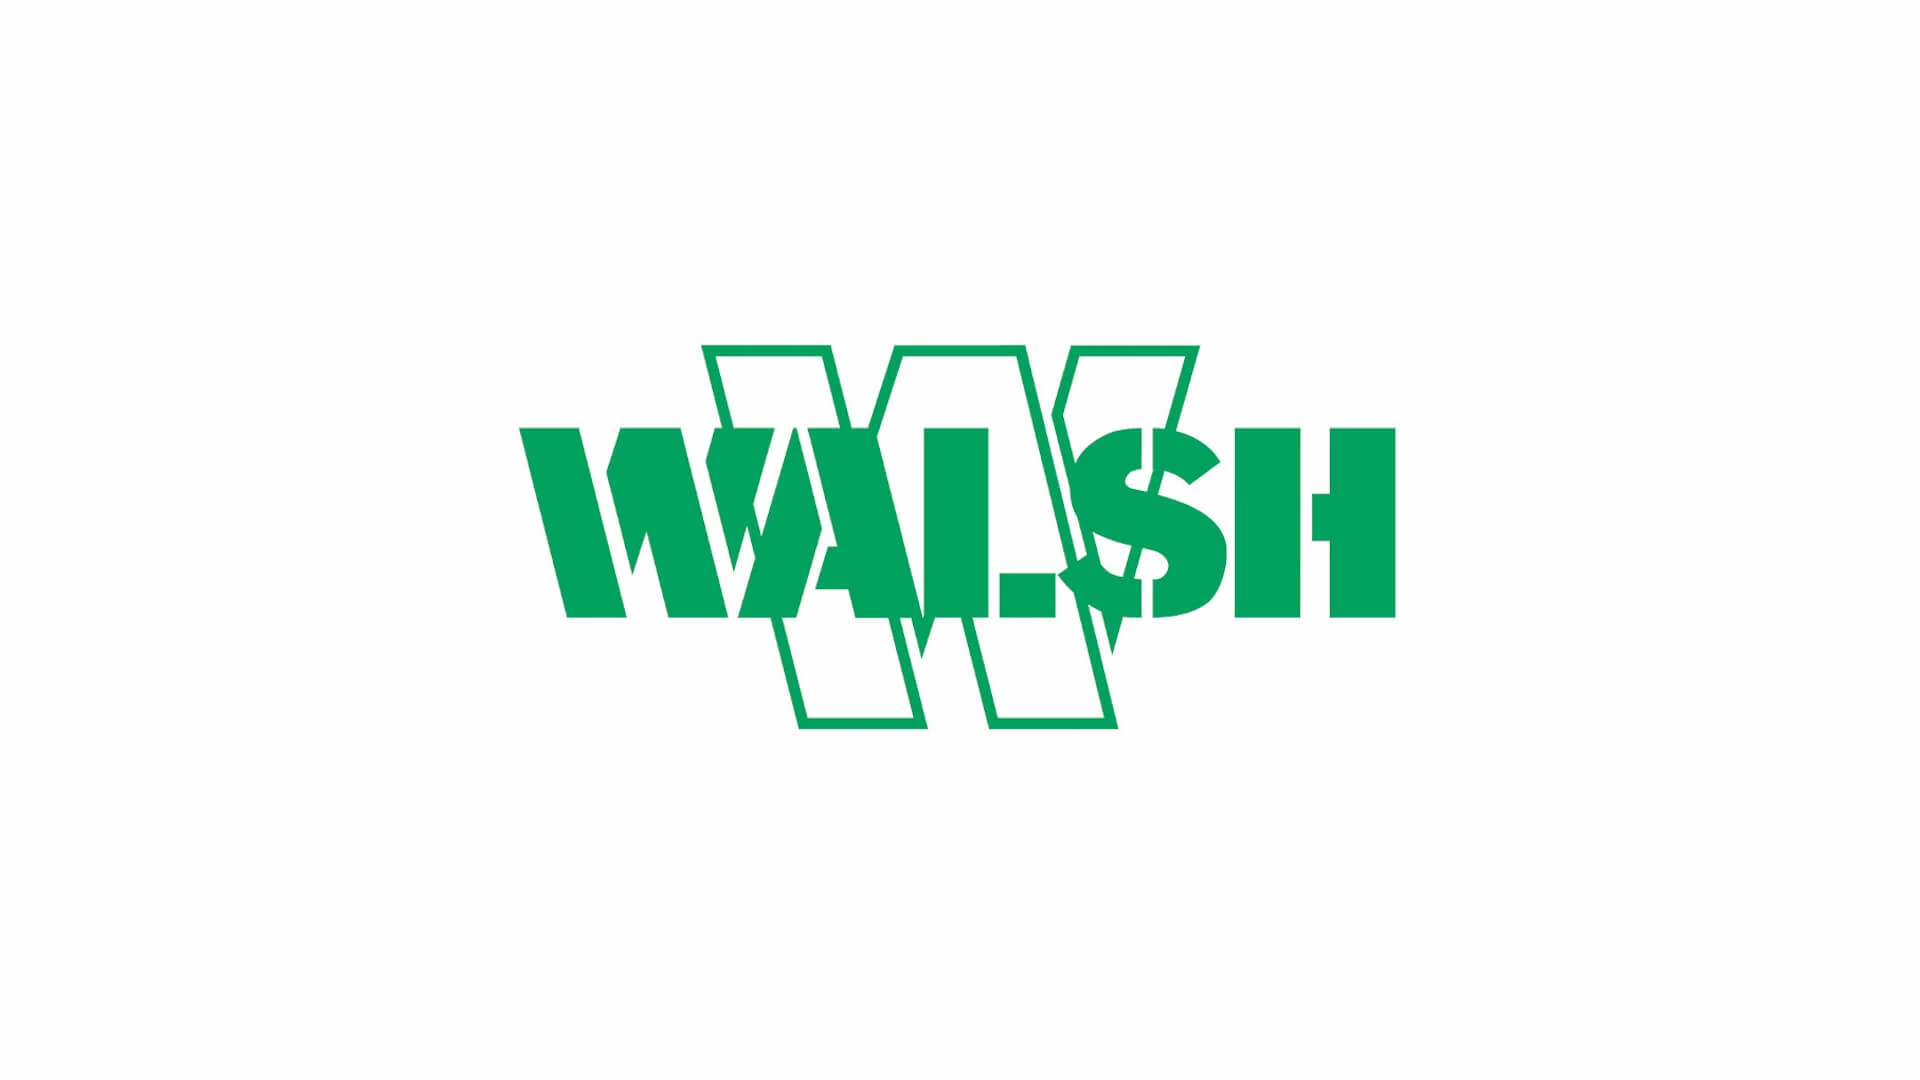 The Walsh Group